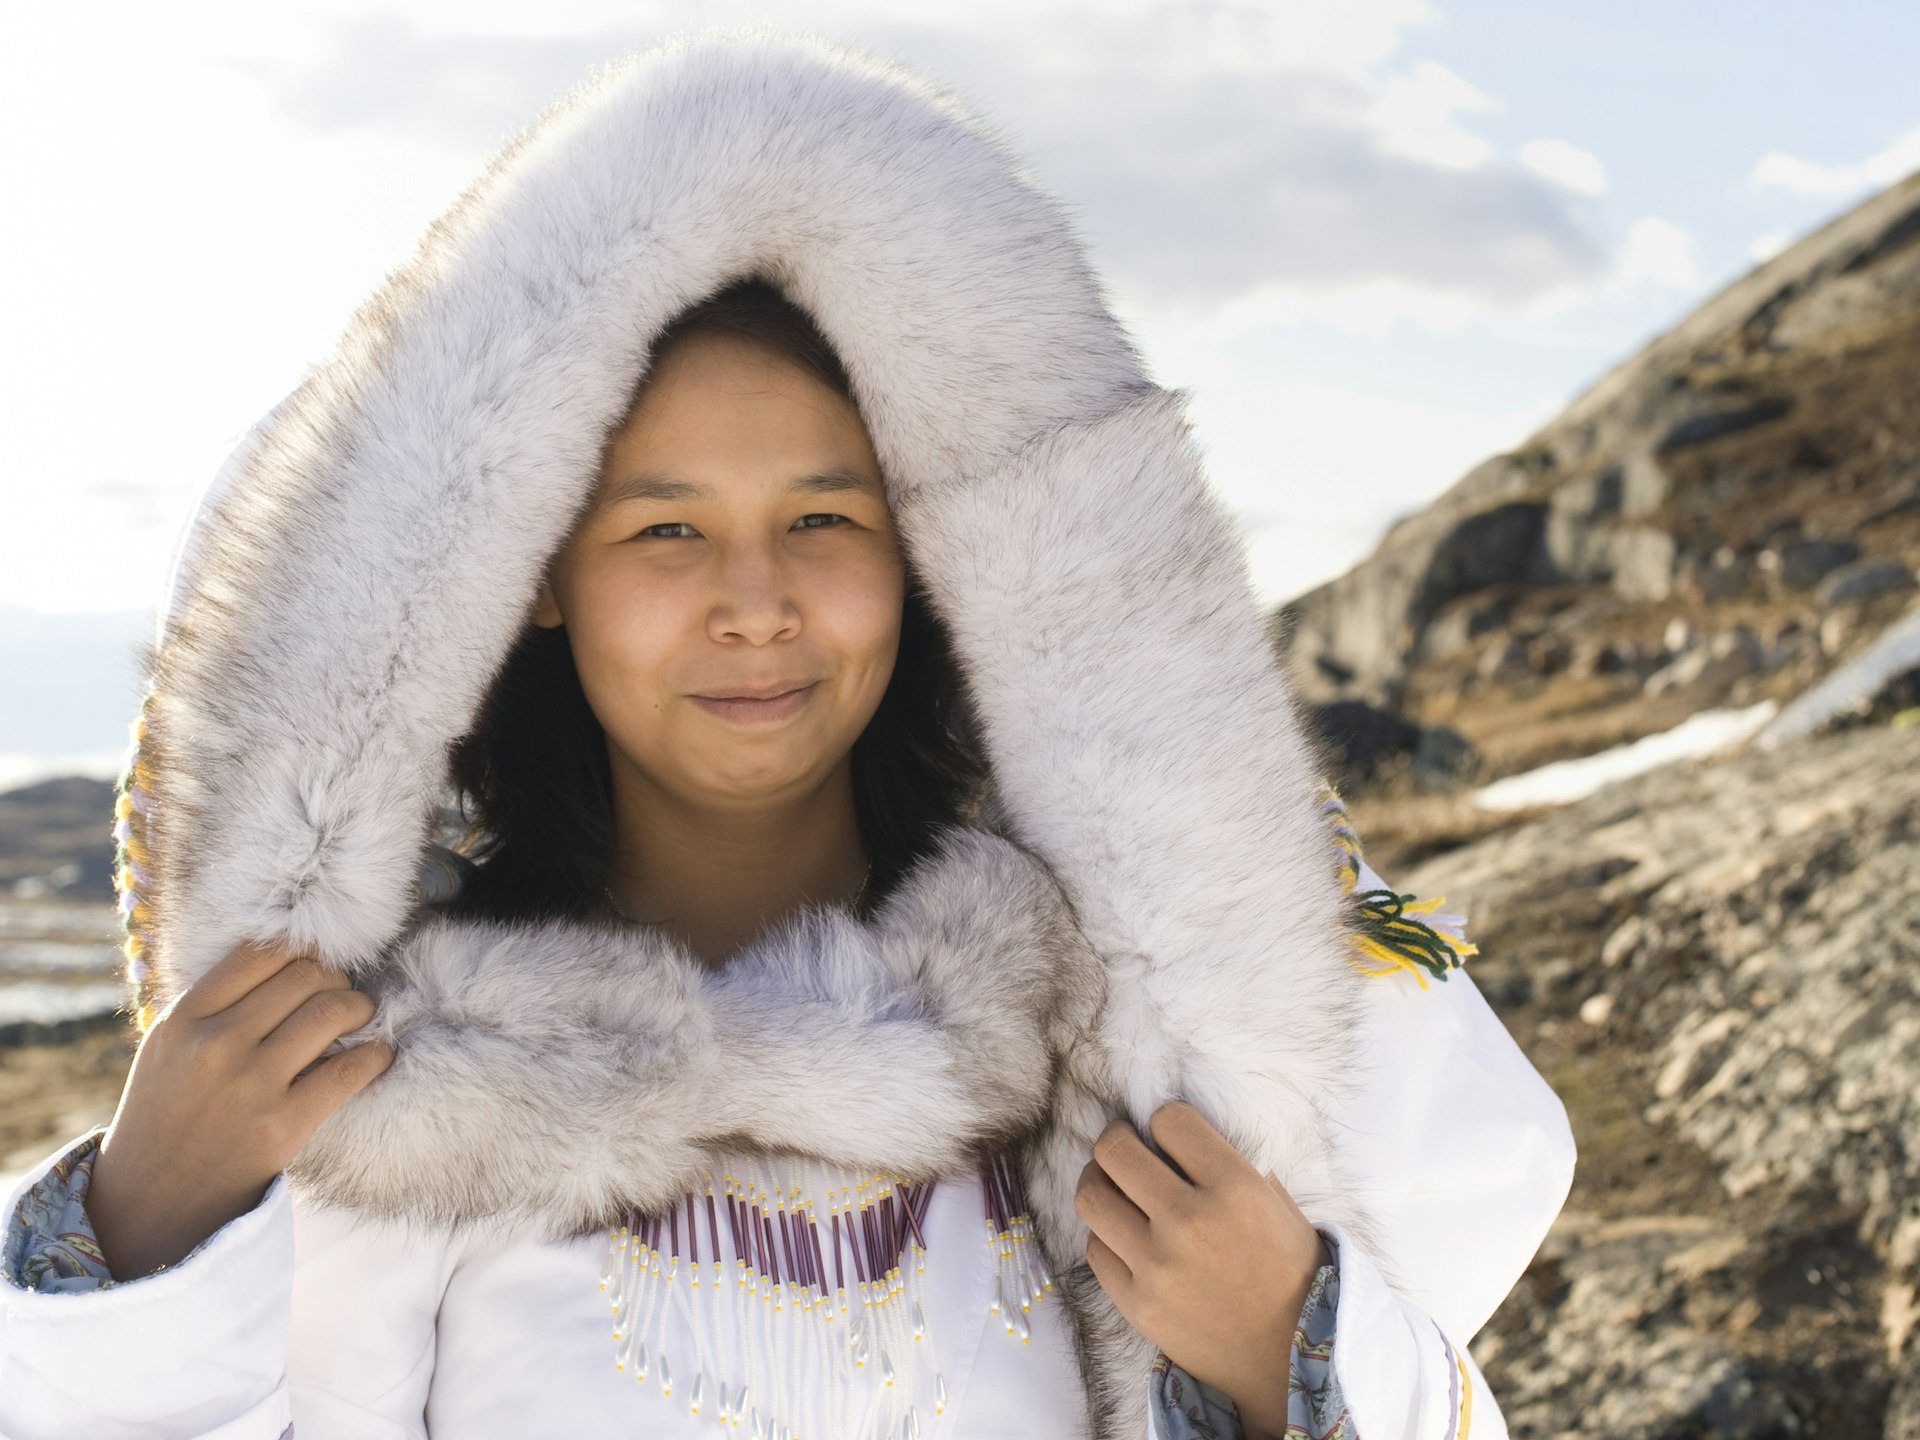 Picture of an Inuit woman standing on a tundra in Baffin Island, Canada. The woman is wearing a thick fur hood over thick white traditional clothing. The woman is wearing a necklace decorated in white and purple. The sky above the tundra is filled with cotton white clouds.